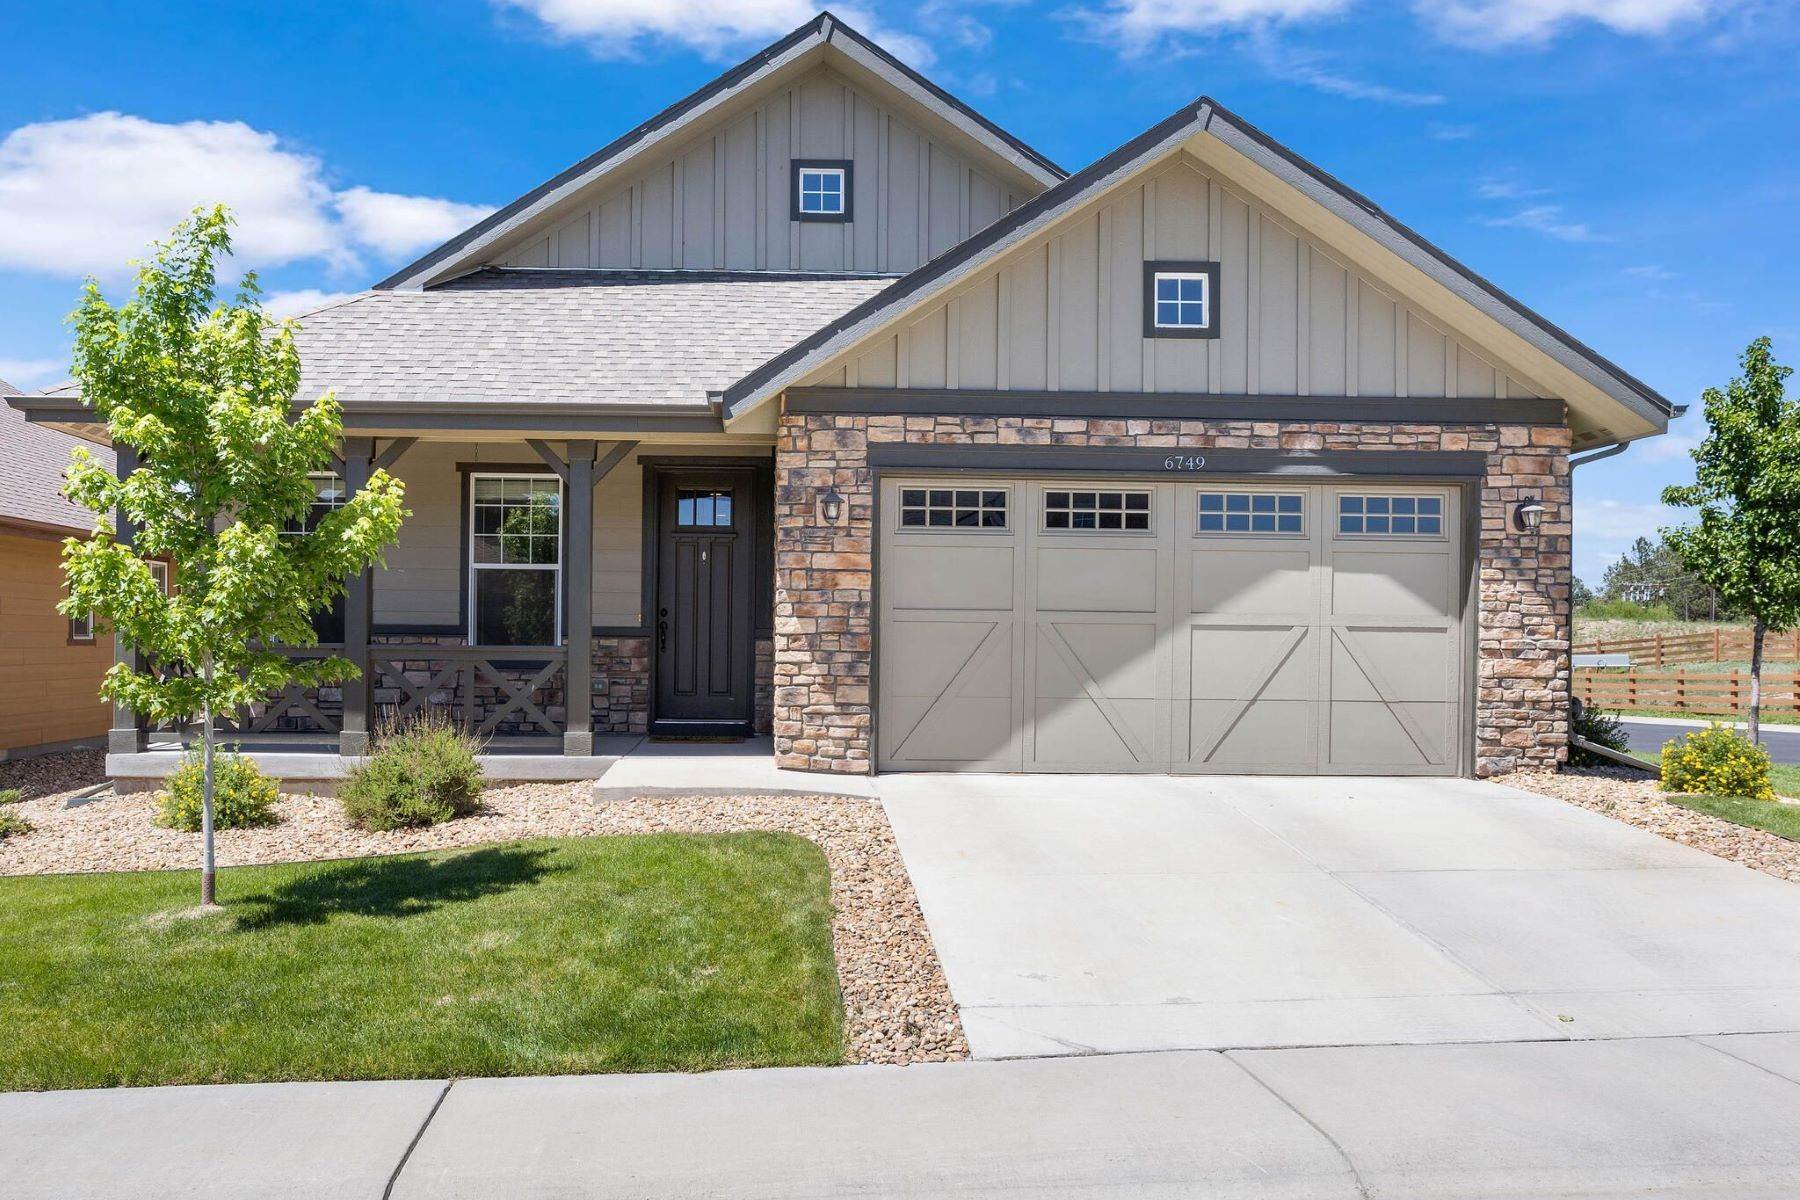 Single Family Homes for Active at Low maintenance living in the gated neighborhood of Pinery West! 6749 Club Villa Road Parker, Colorado 80134 United States